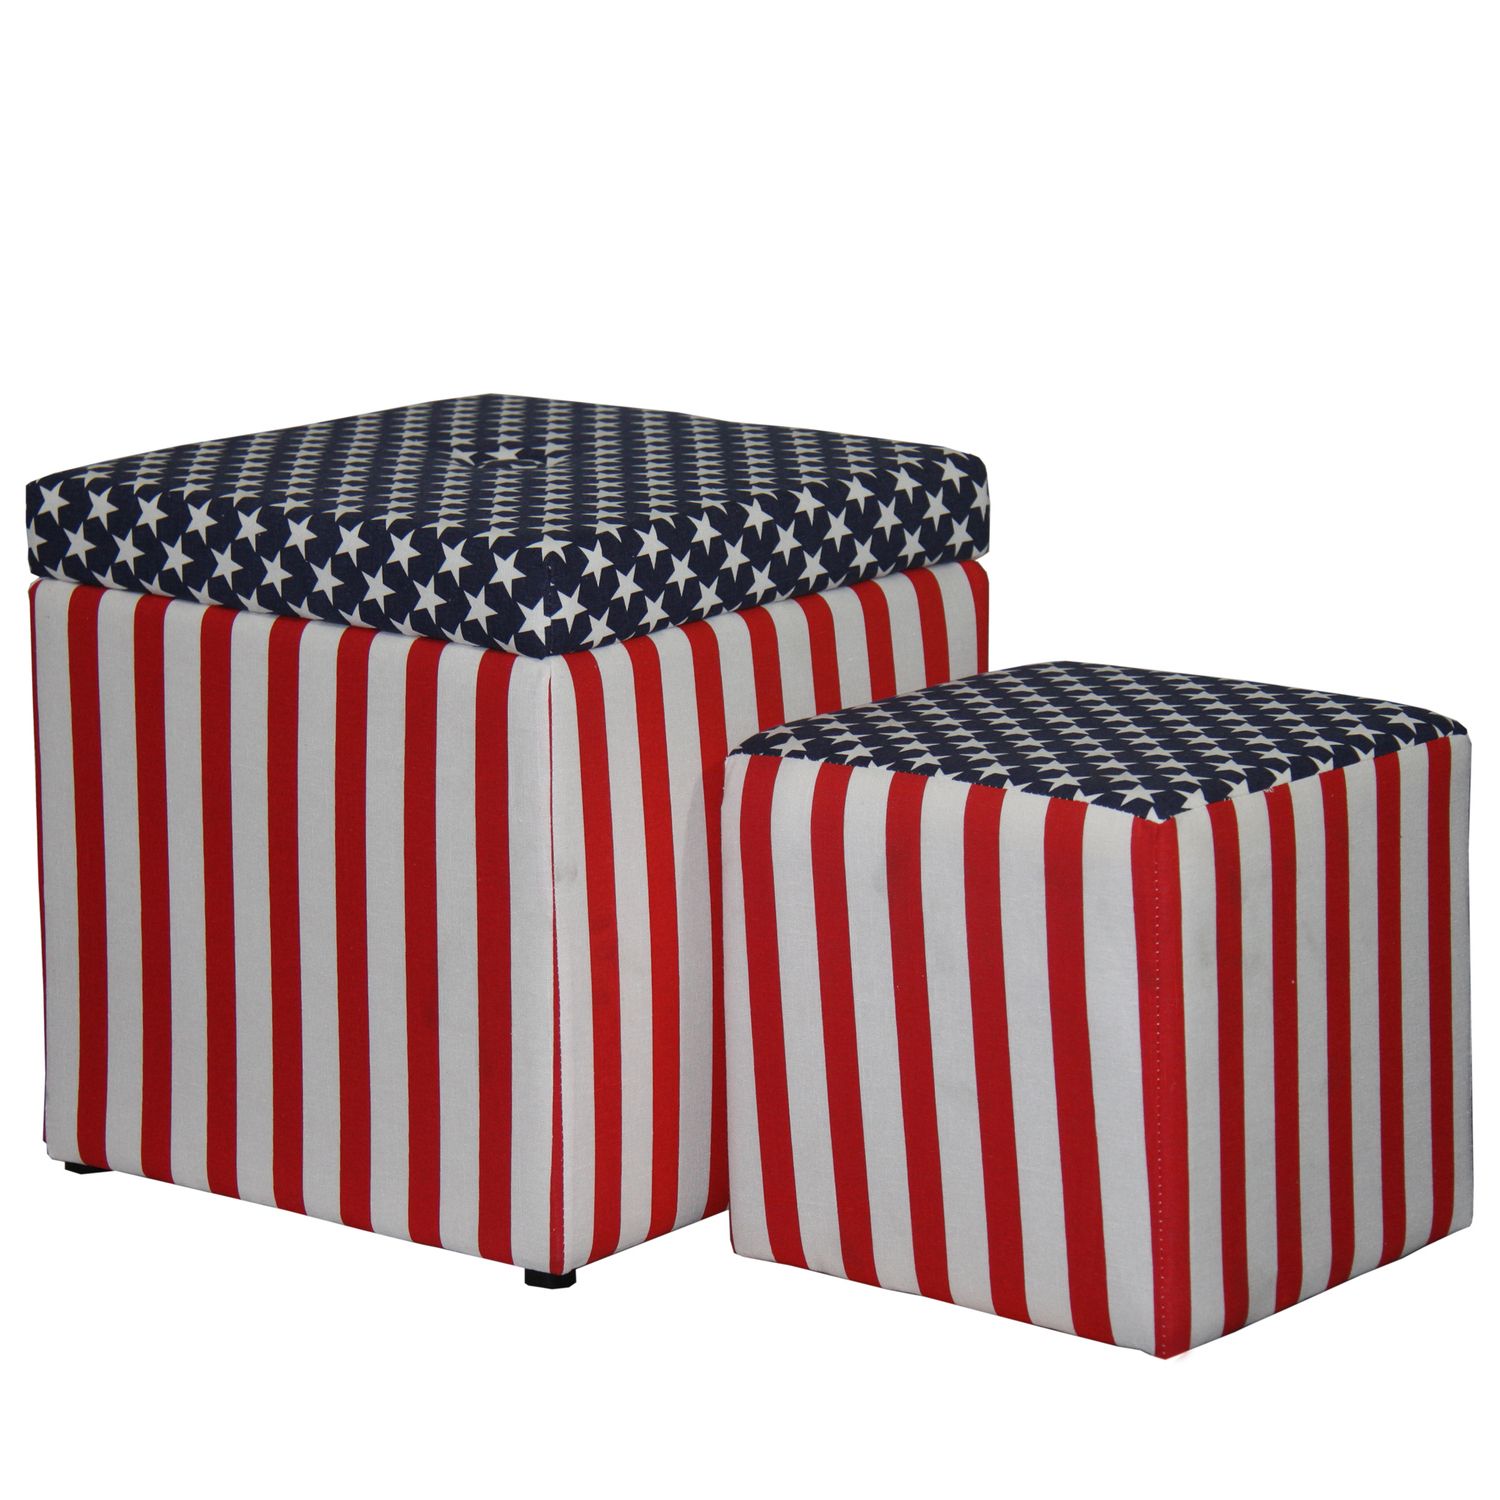 Preferred Multi Color Fabric Square Ottomans In Ore International 18"h Patriotic Storage Ottoman 1 Extra Seating Color (View 2 of 10)